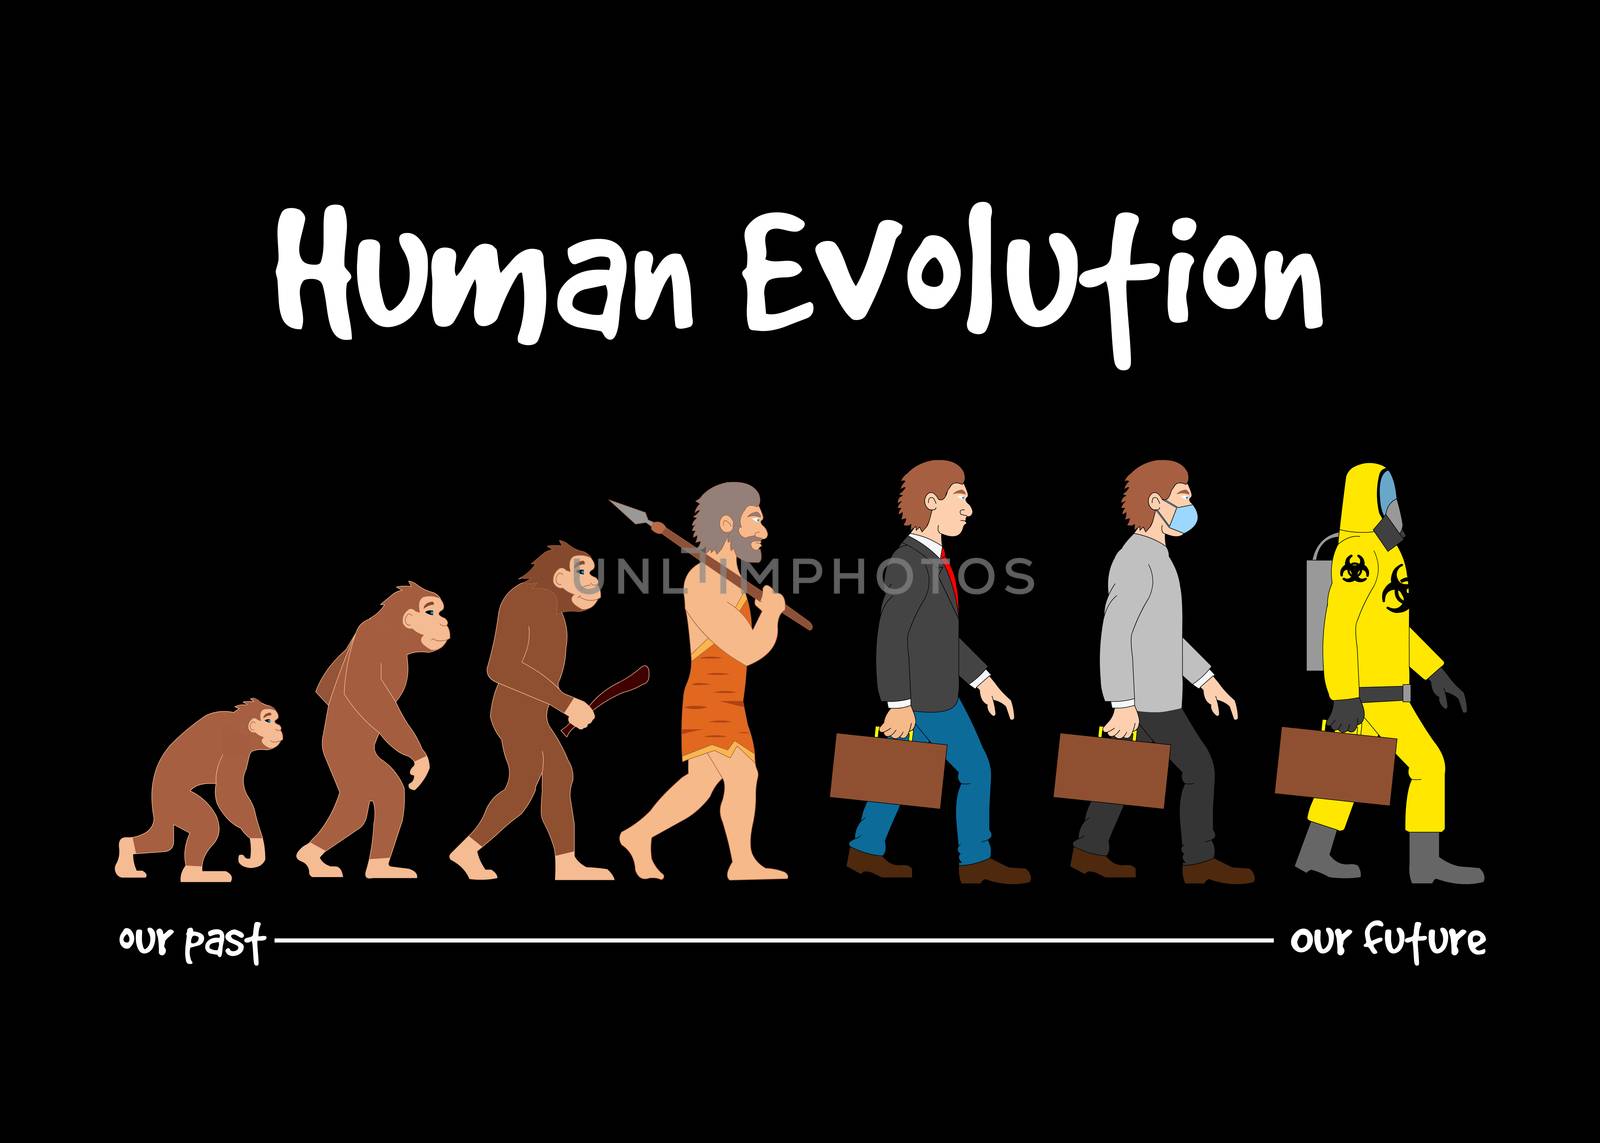 Evolution - our future by Bigalbaloo